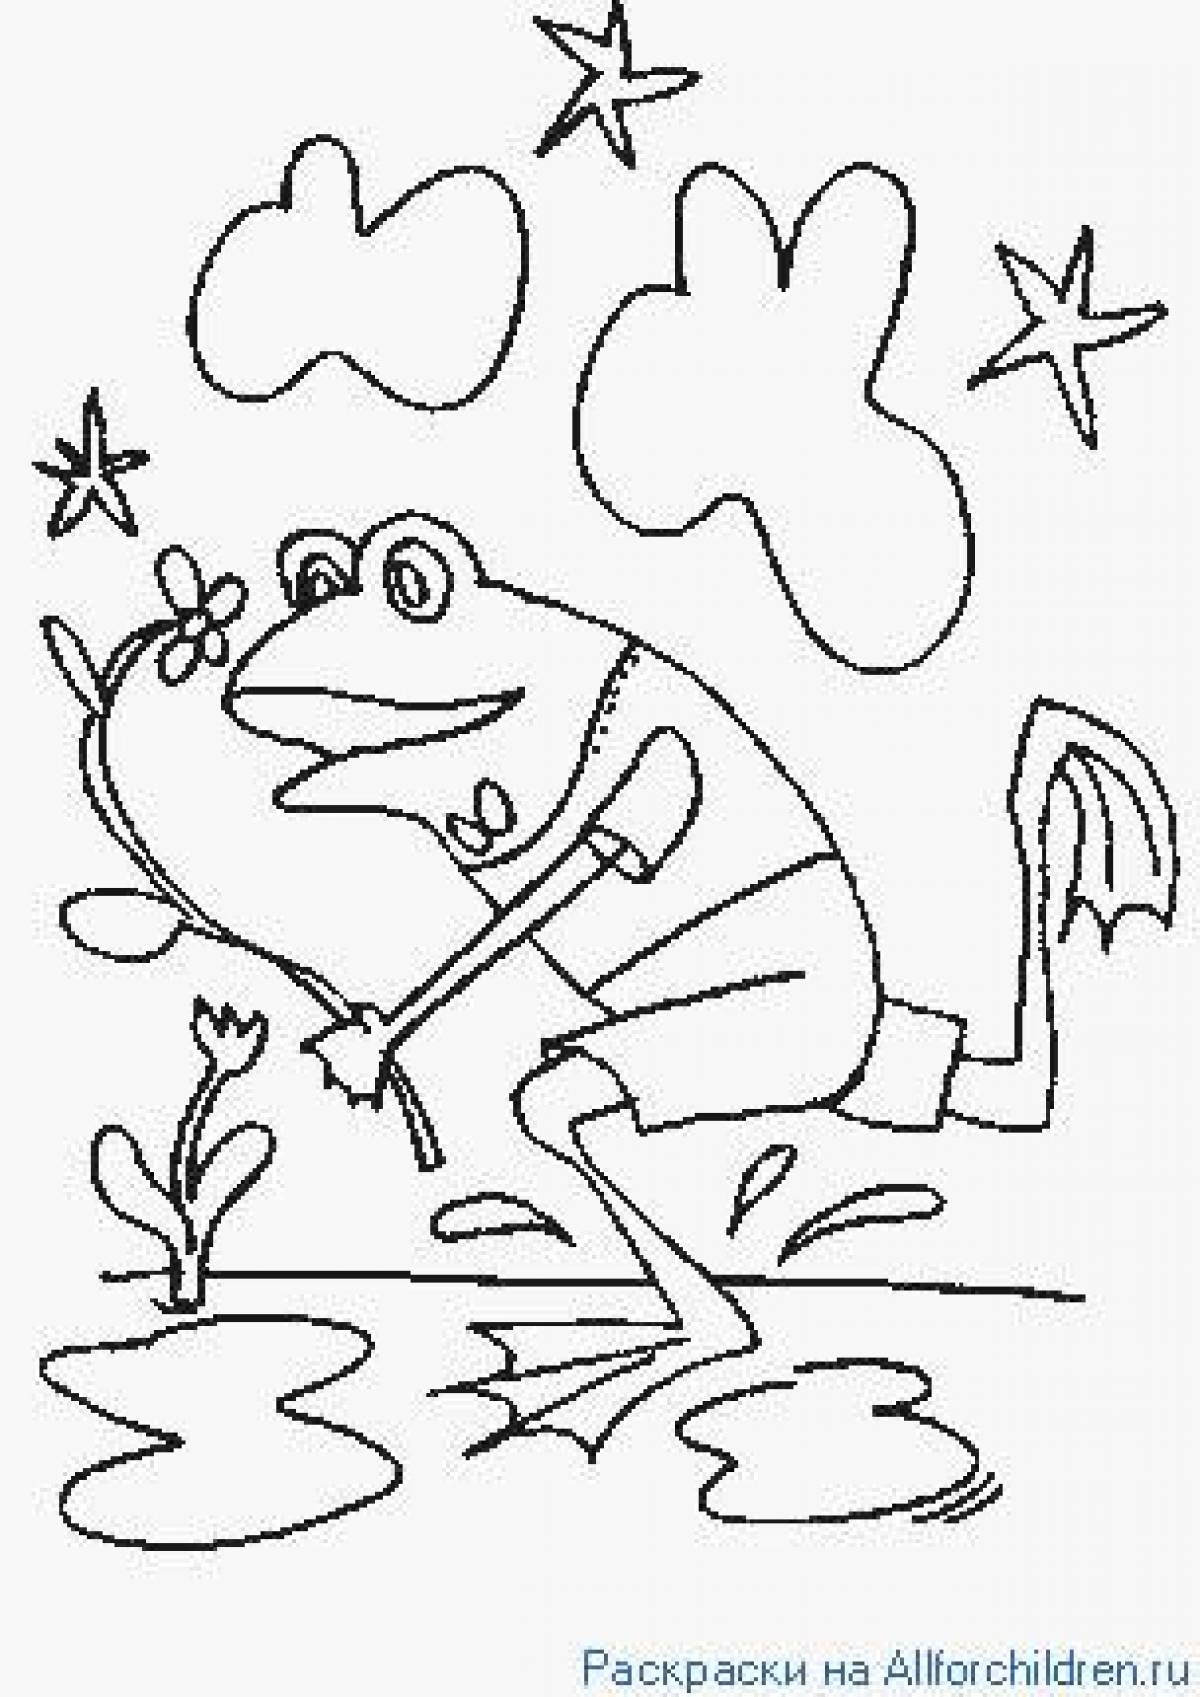 A mischievous traveling frog